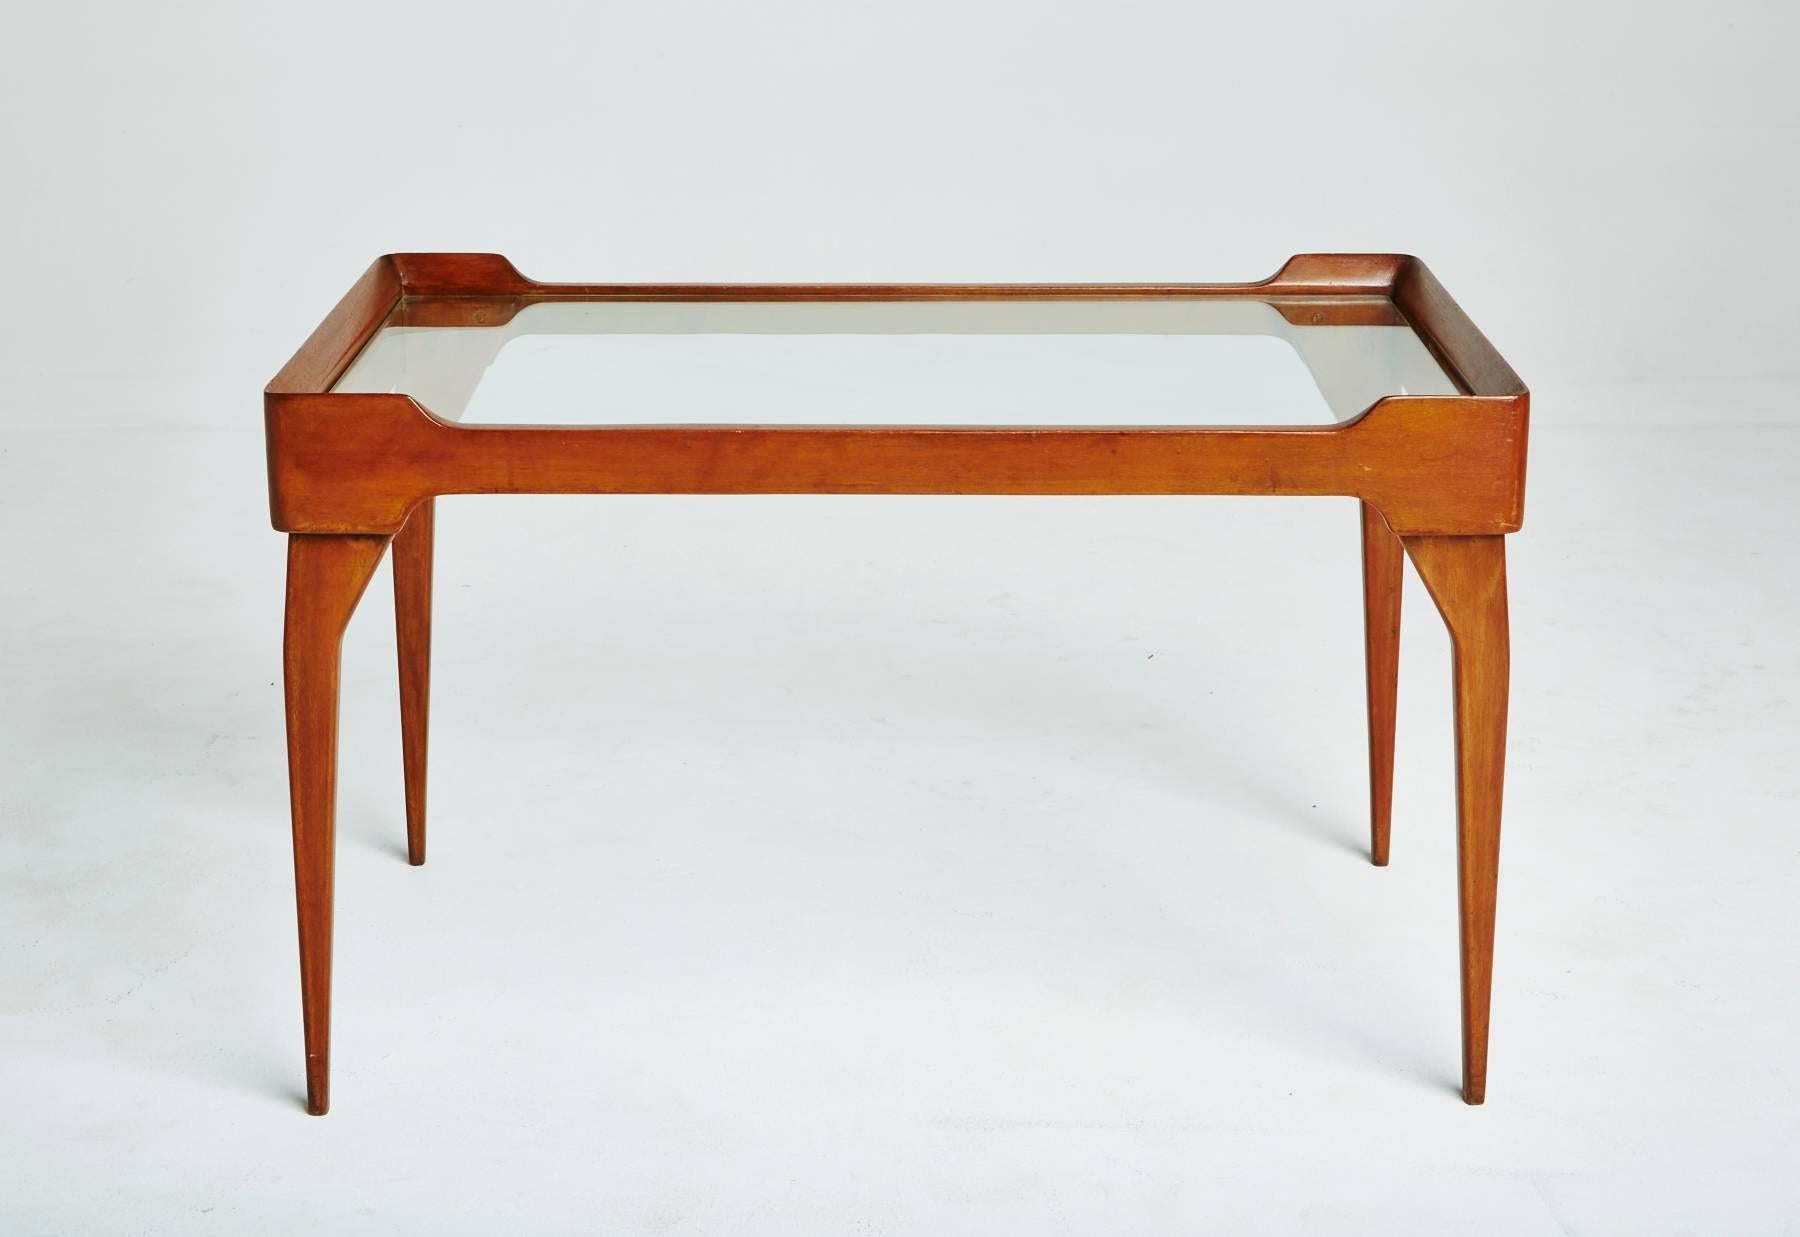 Created in the style of famed Italian designer Ico Parisi, circa 1950, this can be used as an end table, side table, coffee table, or a nightstand. The bright teakwood frame has angled tapered legs, and holds an inset glass table top with a ledge on